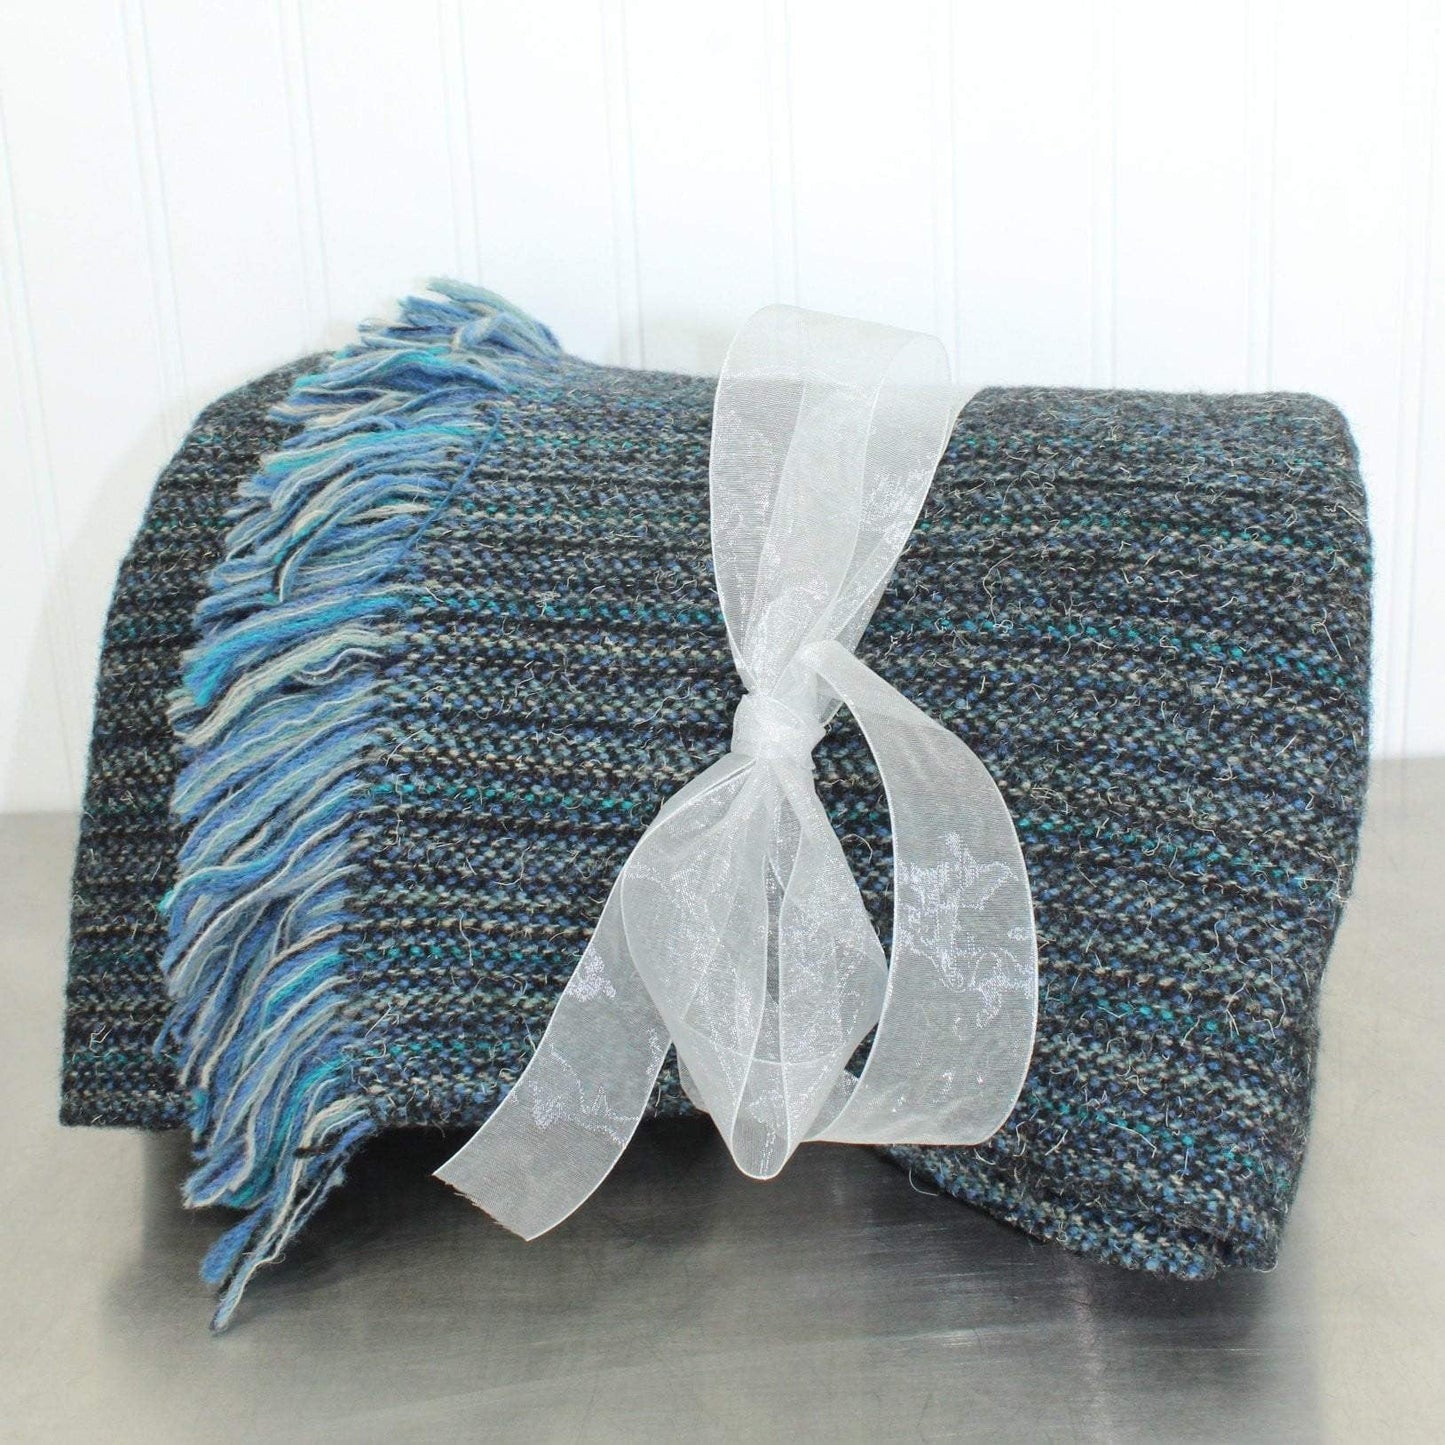 Handsome Wool Throw Blanket Shades of Blue Mixed Linear Woven Fiber 61" X 64" + Fringe